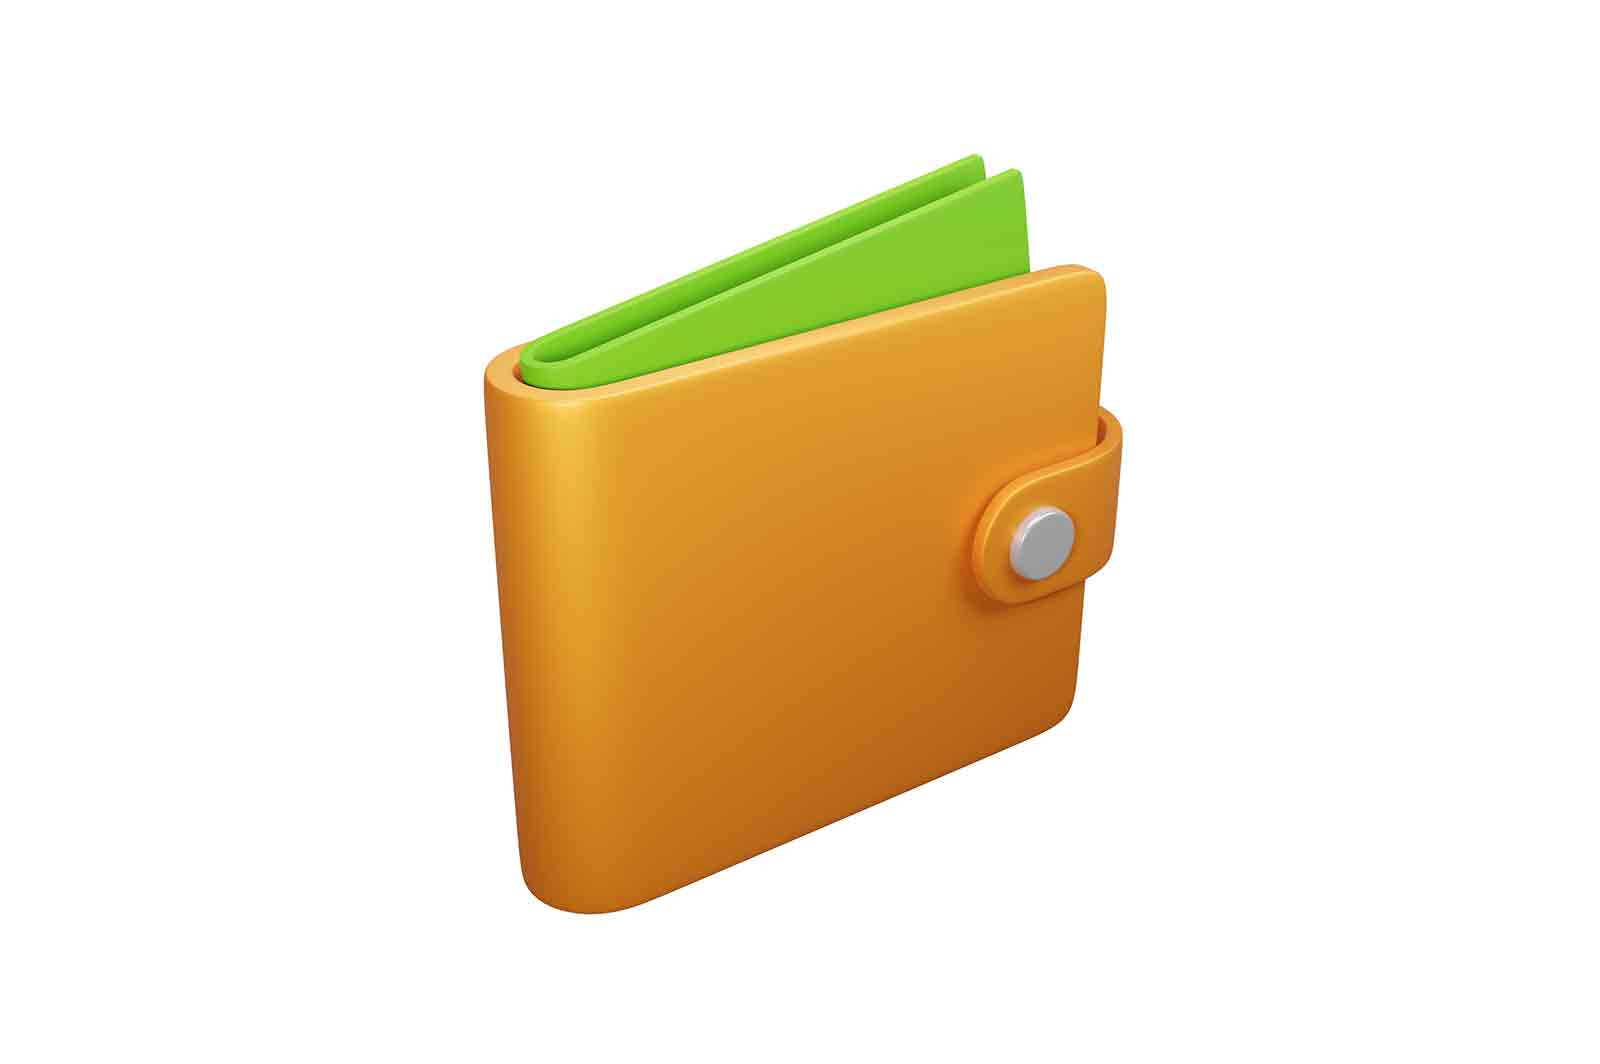 Wallet with paper currency icon, purse for storing and carrying banknotes with clasp business 3d rendered illustration.